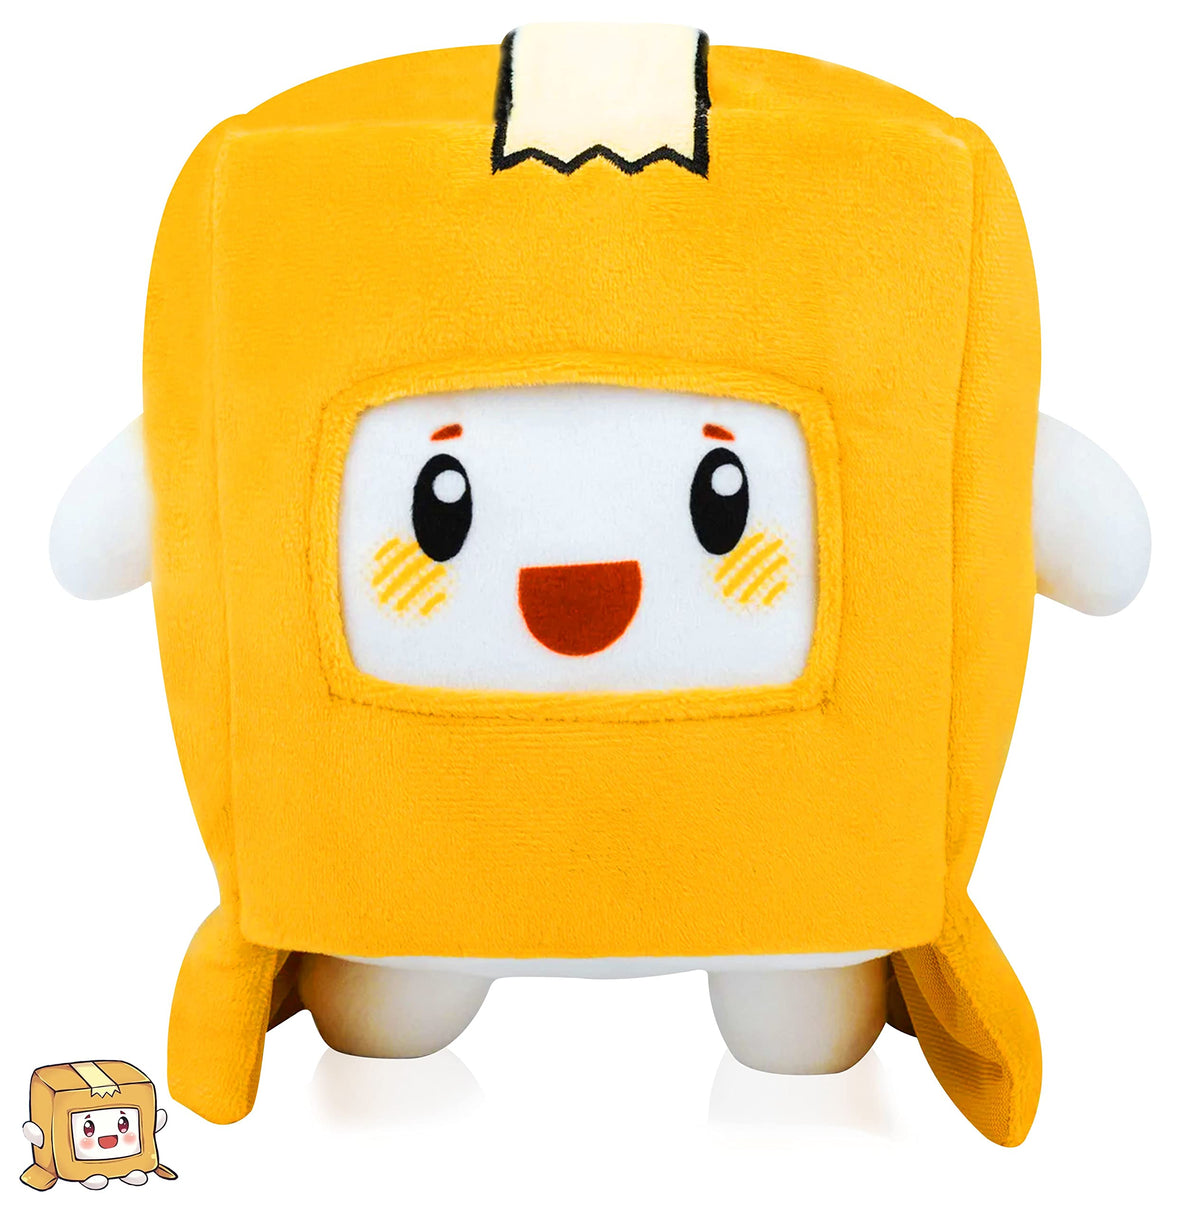 Lankybox Plushies with Detachable Head Mask, Foxy Boxy & Rocky Toy are gifts for Girls, Boys, Kids, Friends, Collect the LankyBox Merch (Boxy)